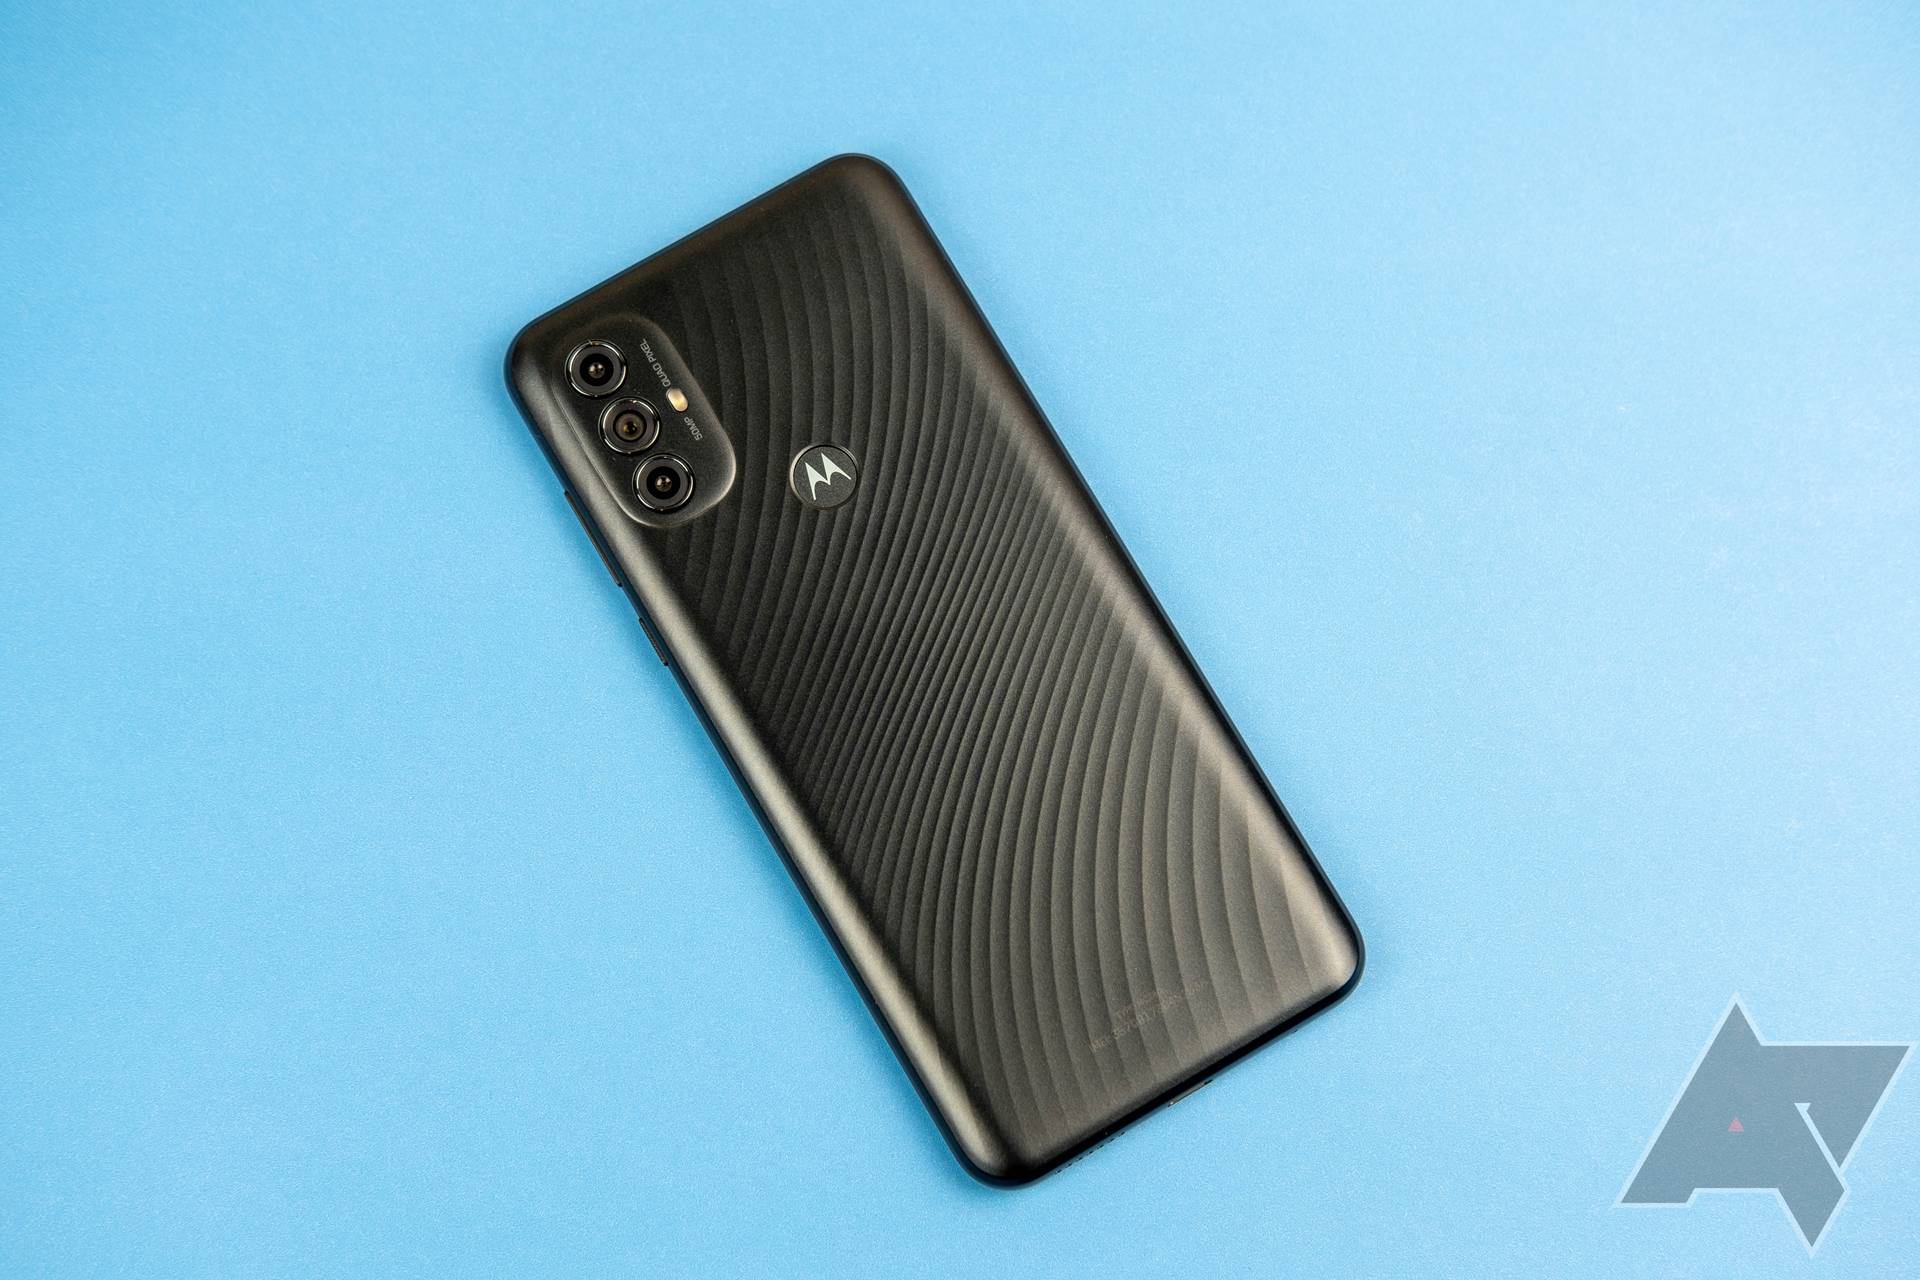 Motorola confirms which phones will get Android 12 and when